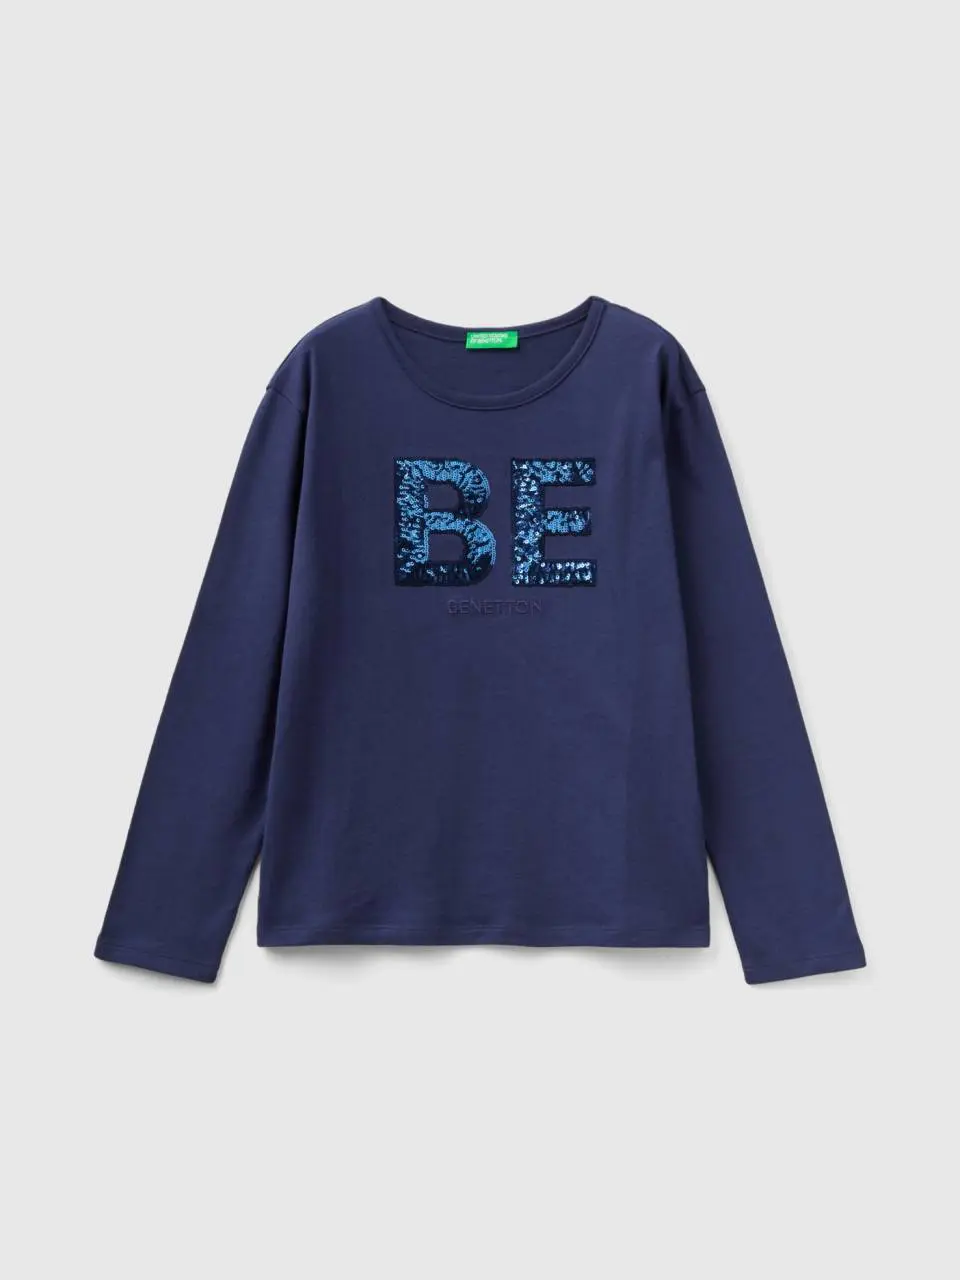 Benetton t-shirt in warm organic cotton with sequins. 1